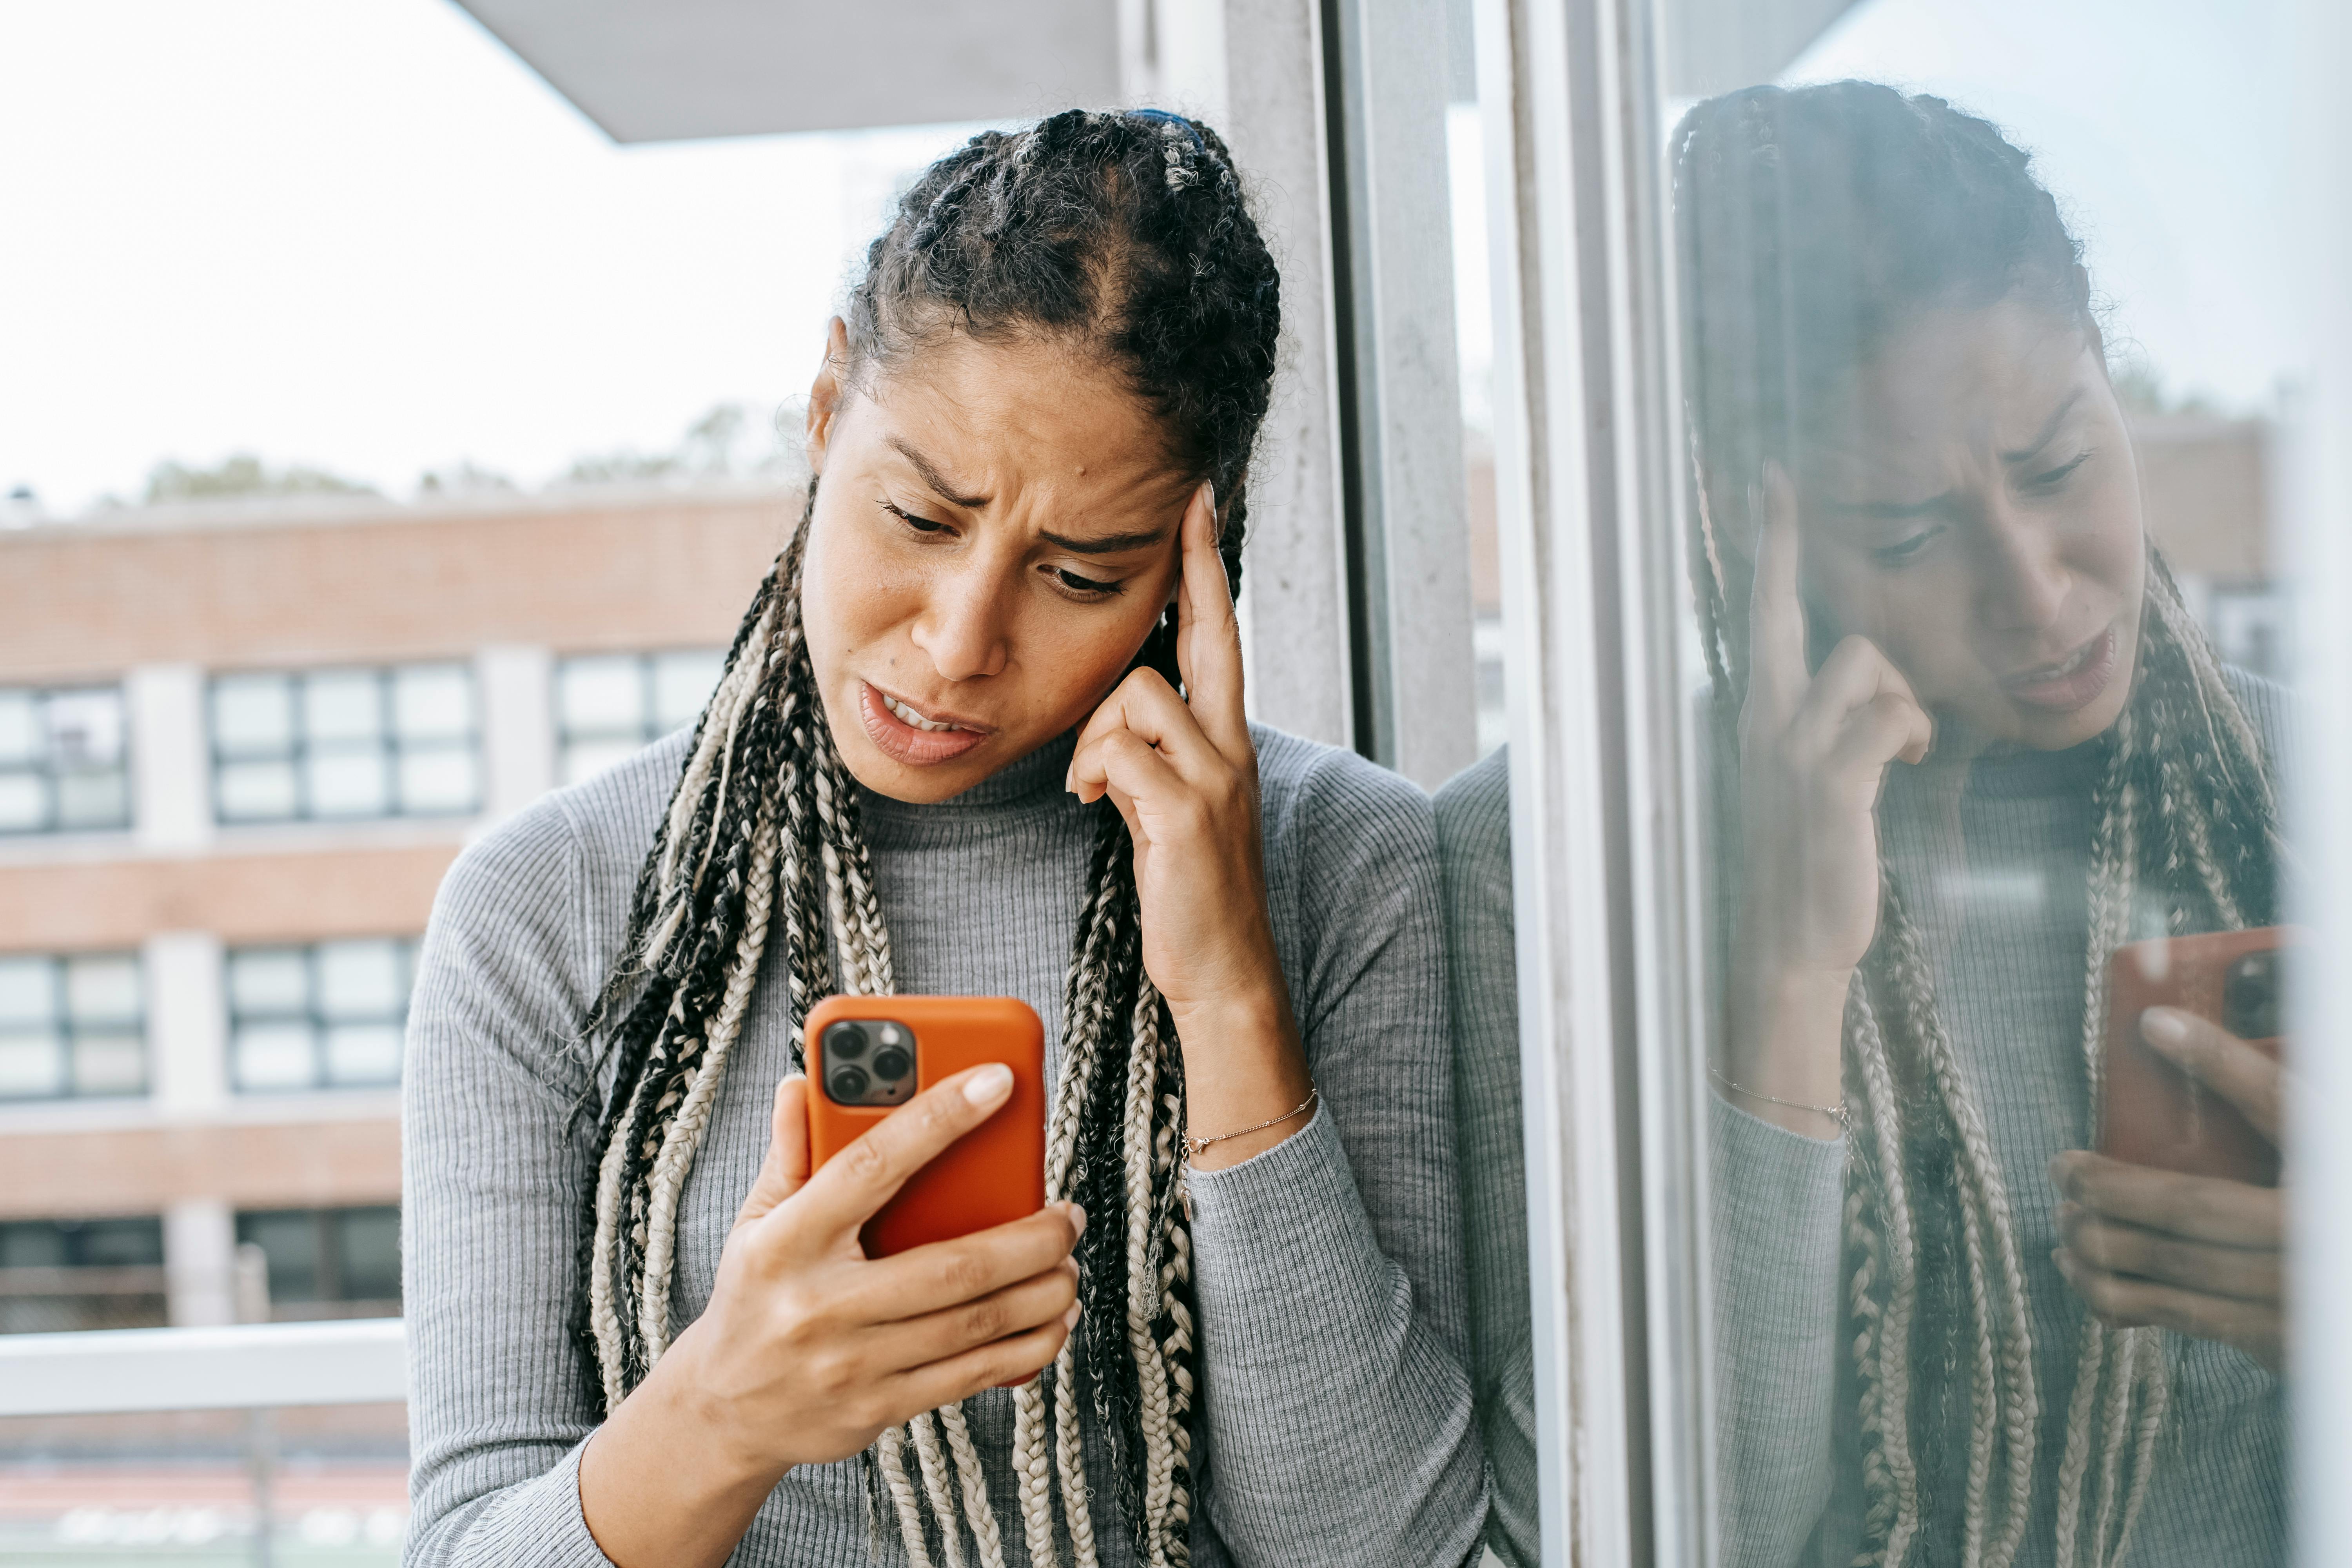 A woman looking upset while talking on a phone | Source: Pexels